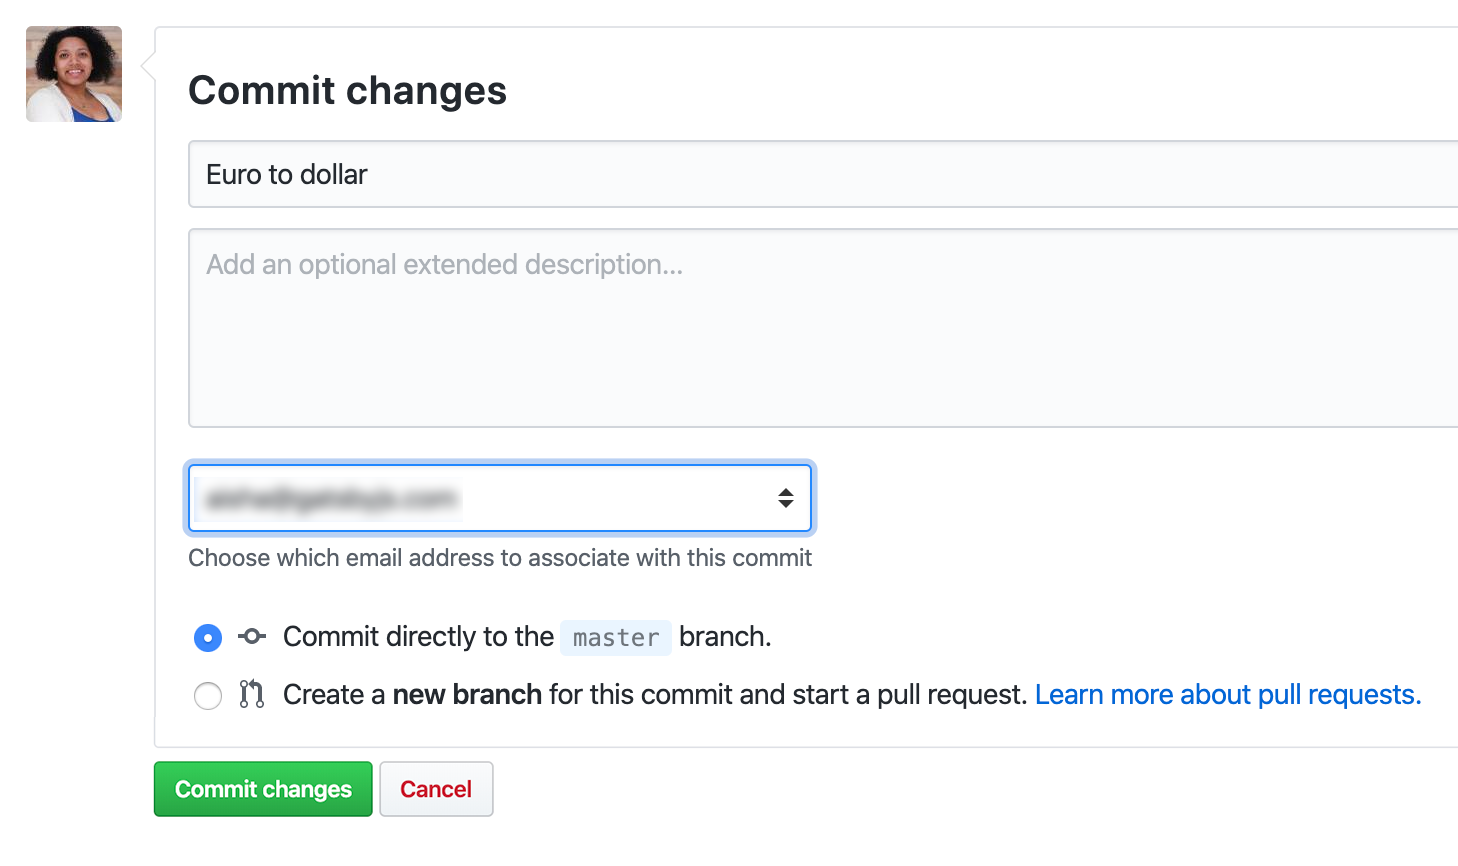 commit changes menu with message 'Euro to dollar'. Email address is blurred and there's a big, green 'Commit changes' button